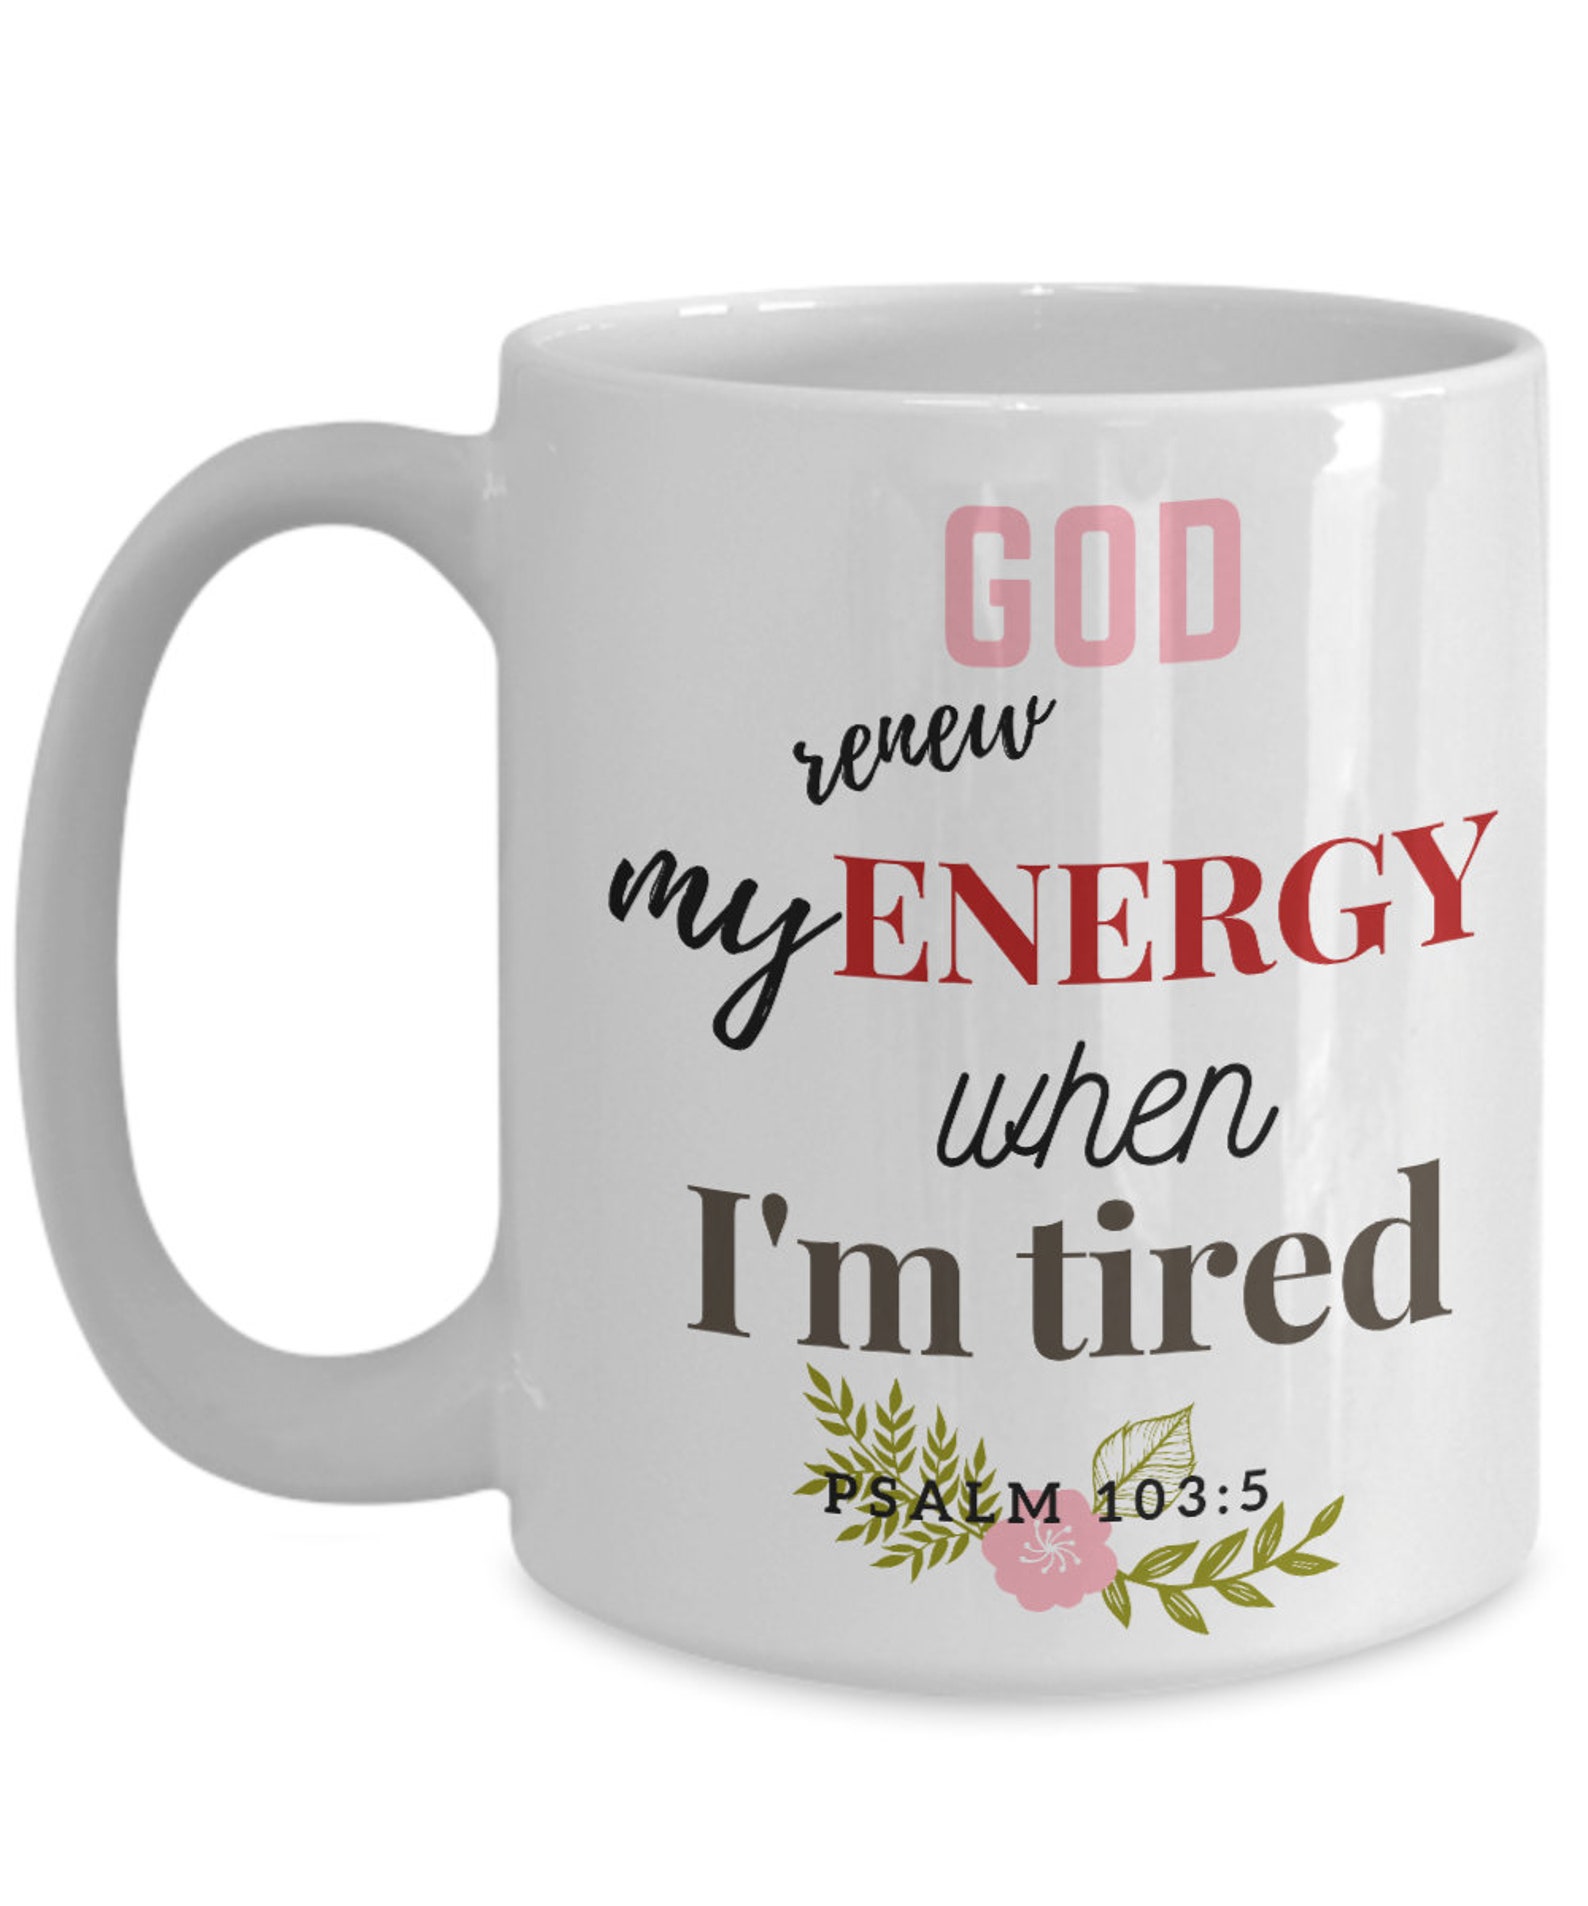 Psalm 1035 Scripture Coffee Mug Bible Verse Quotes Cup